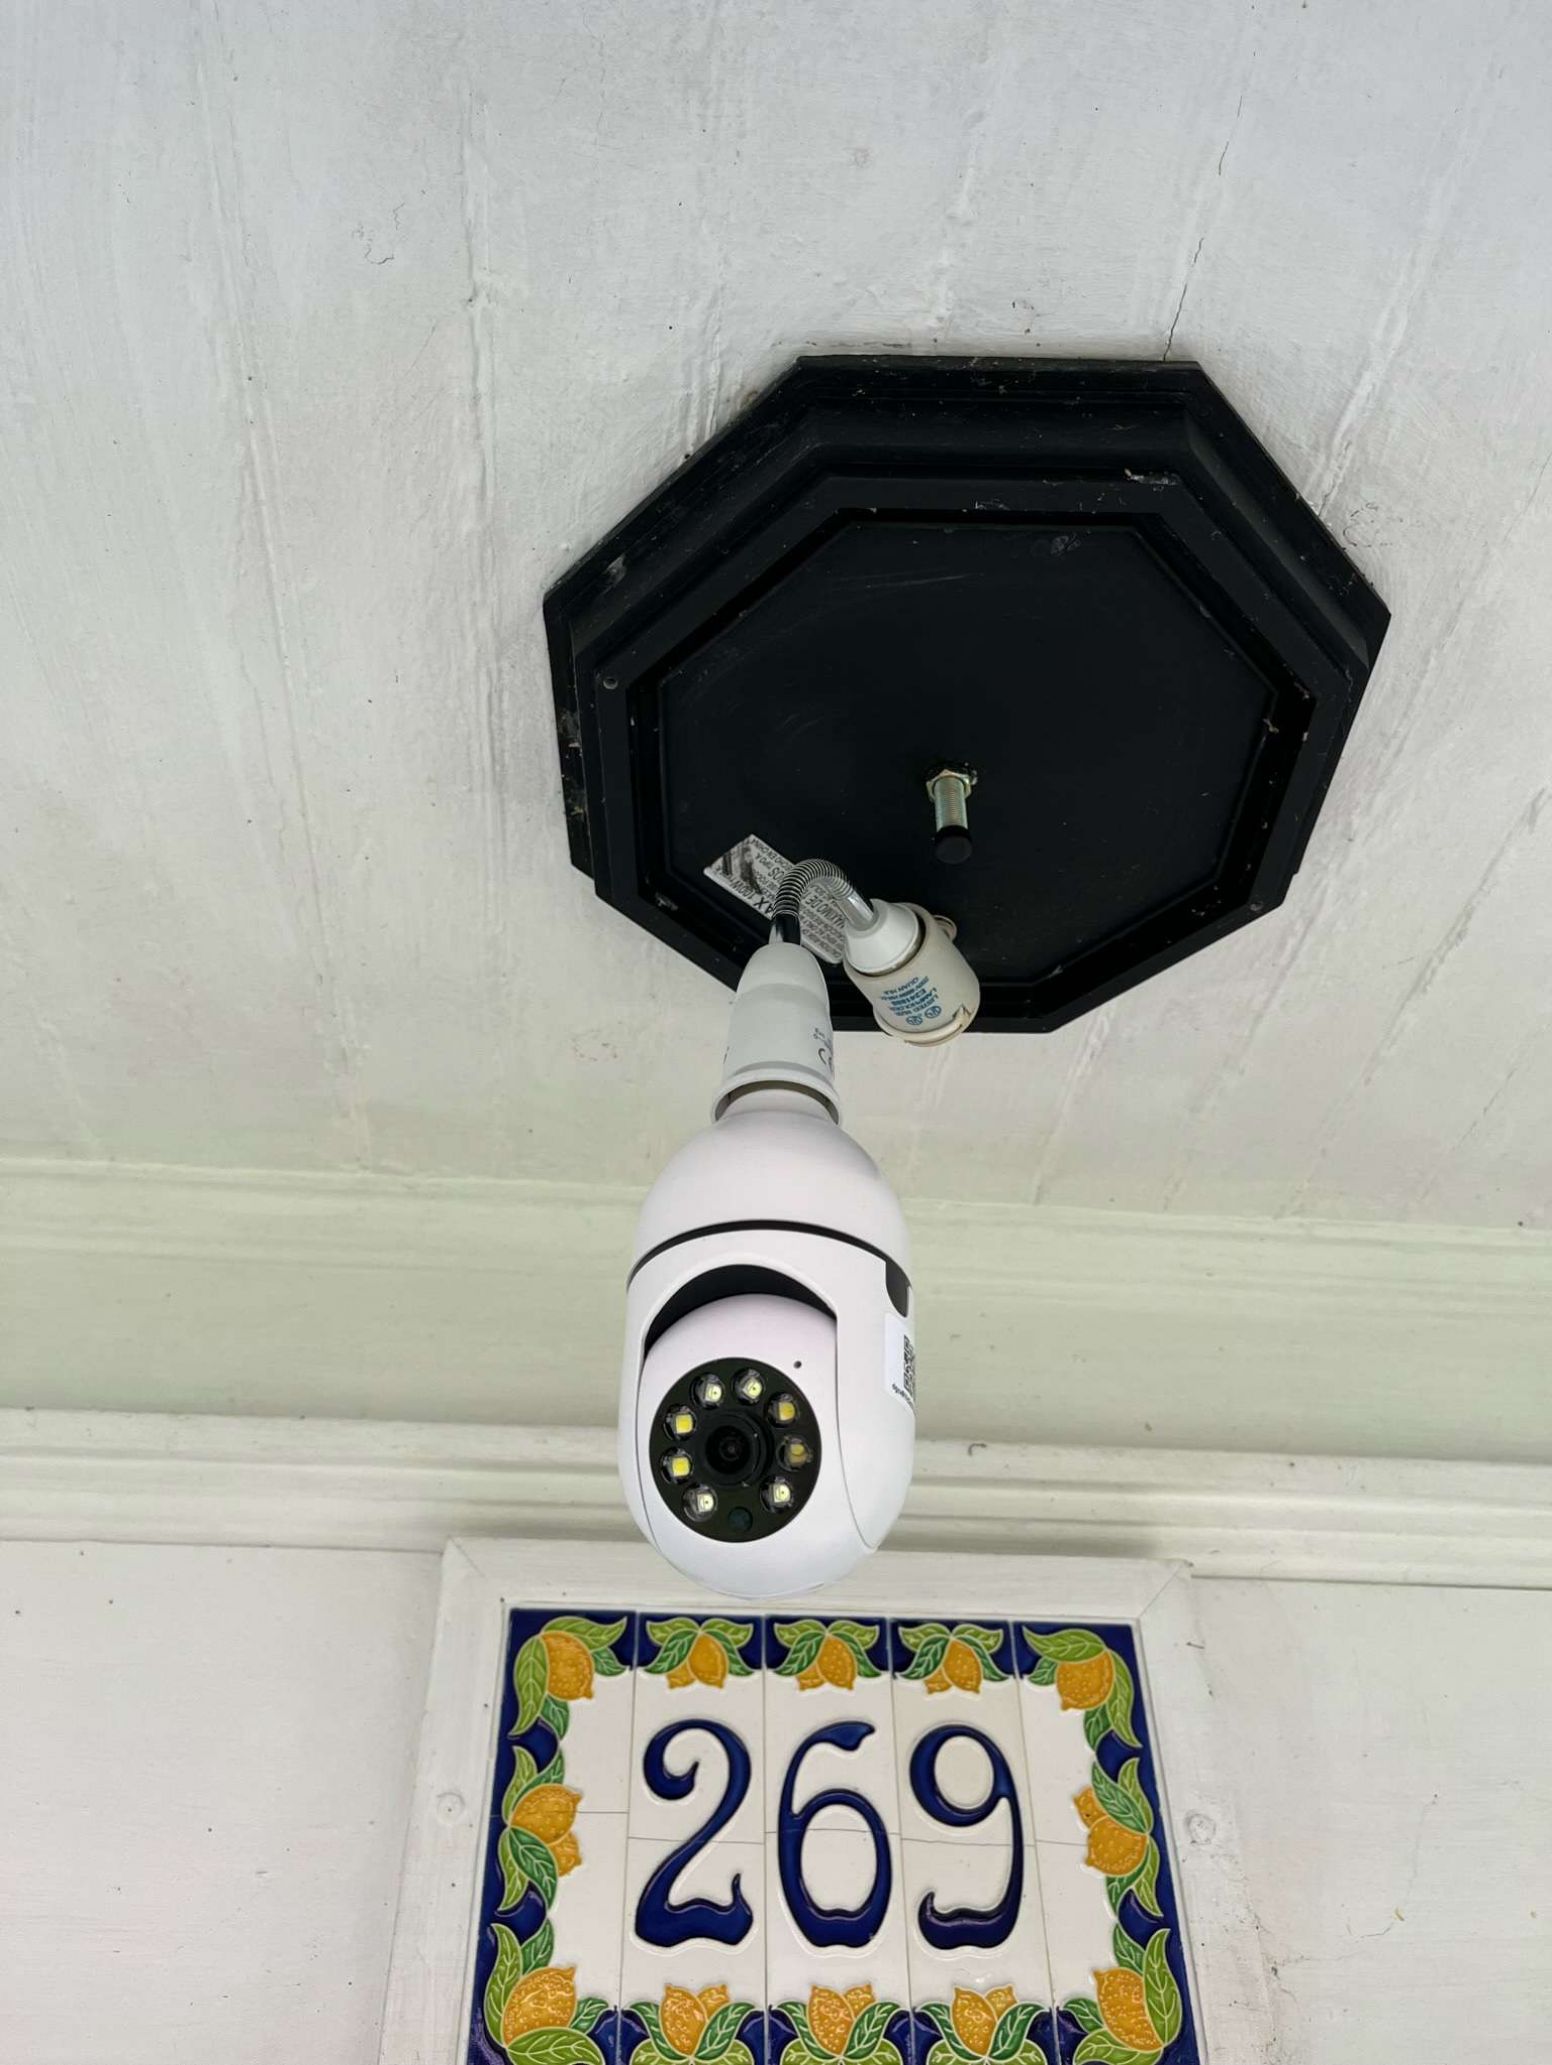 Who Sells Nomad Security Camera